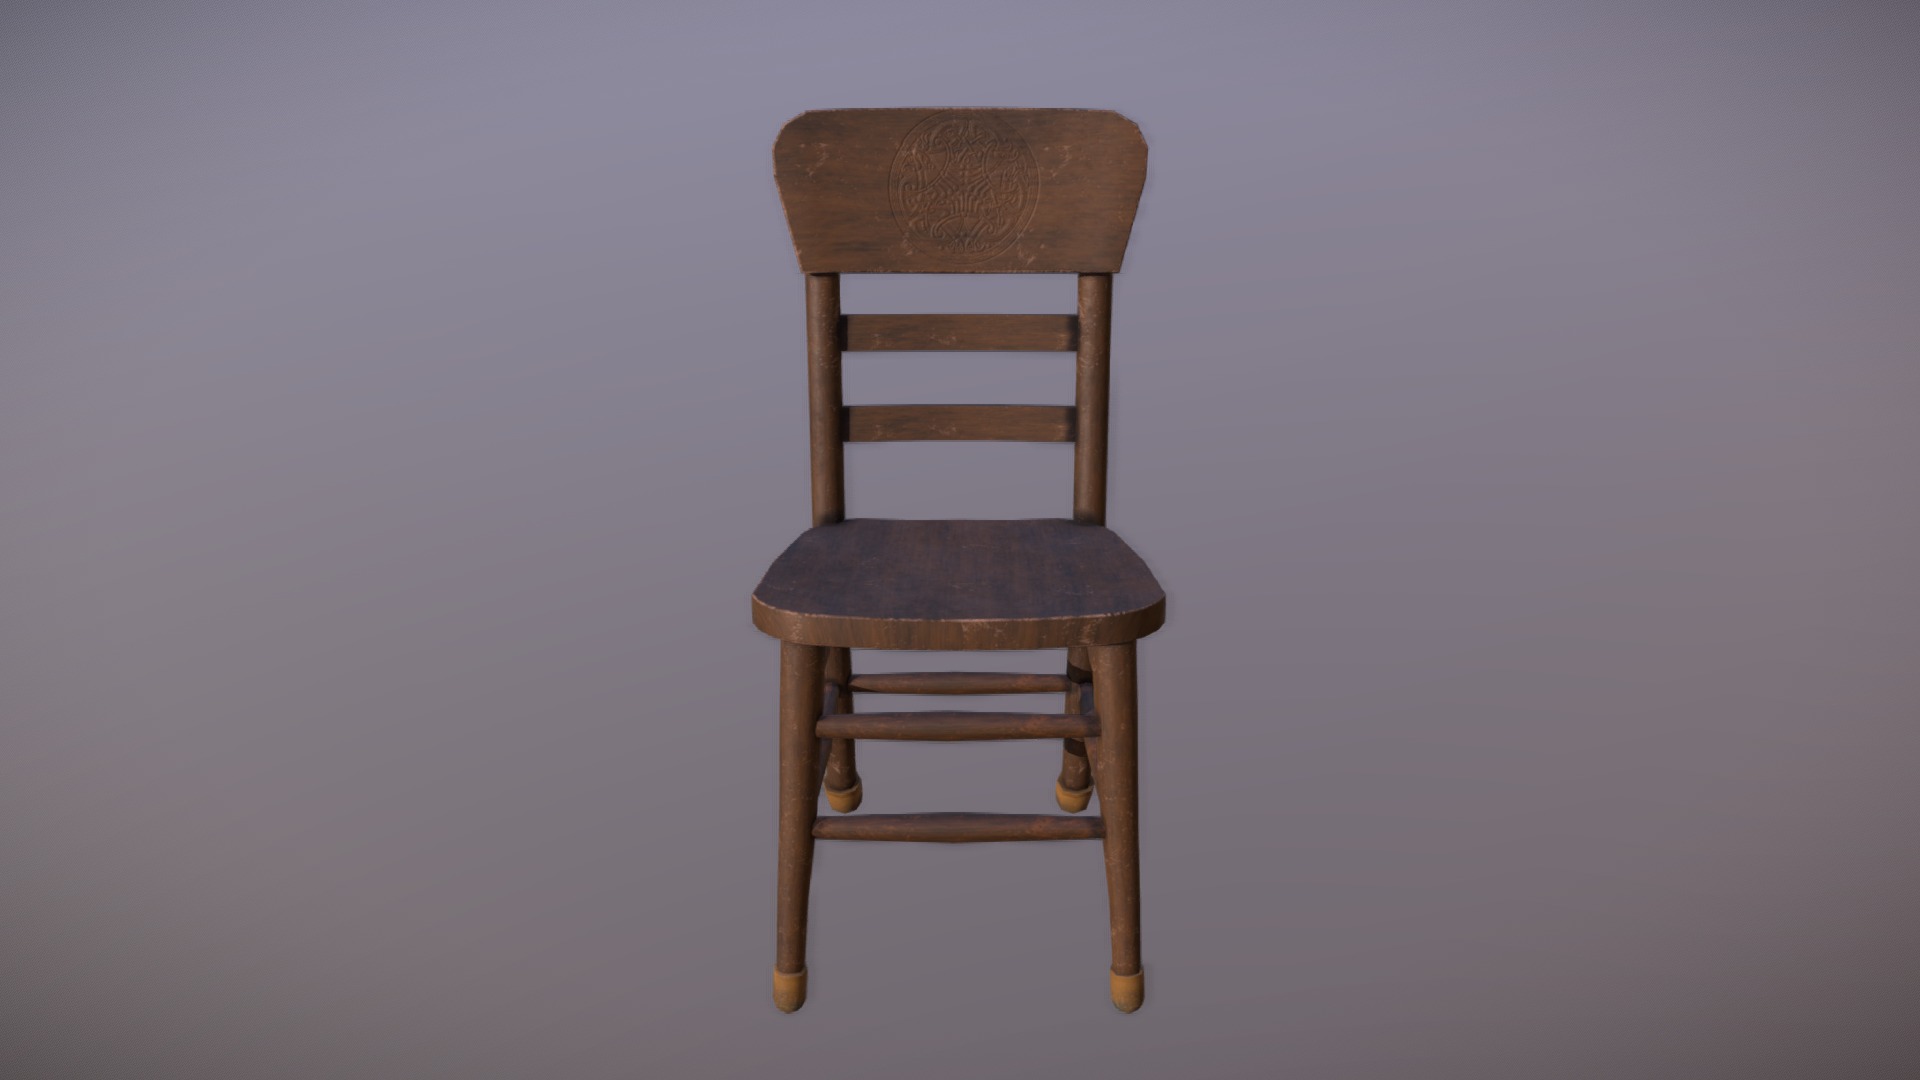 Model of a wood chair for use in a game scene - Wood Chair - 3D model by AllanP 3d model